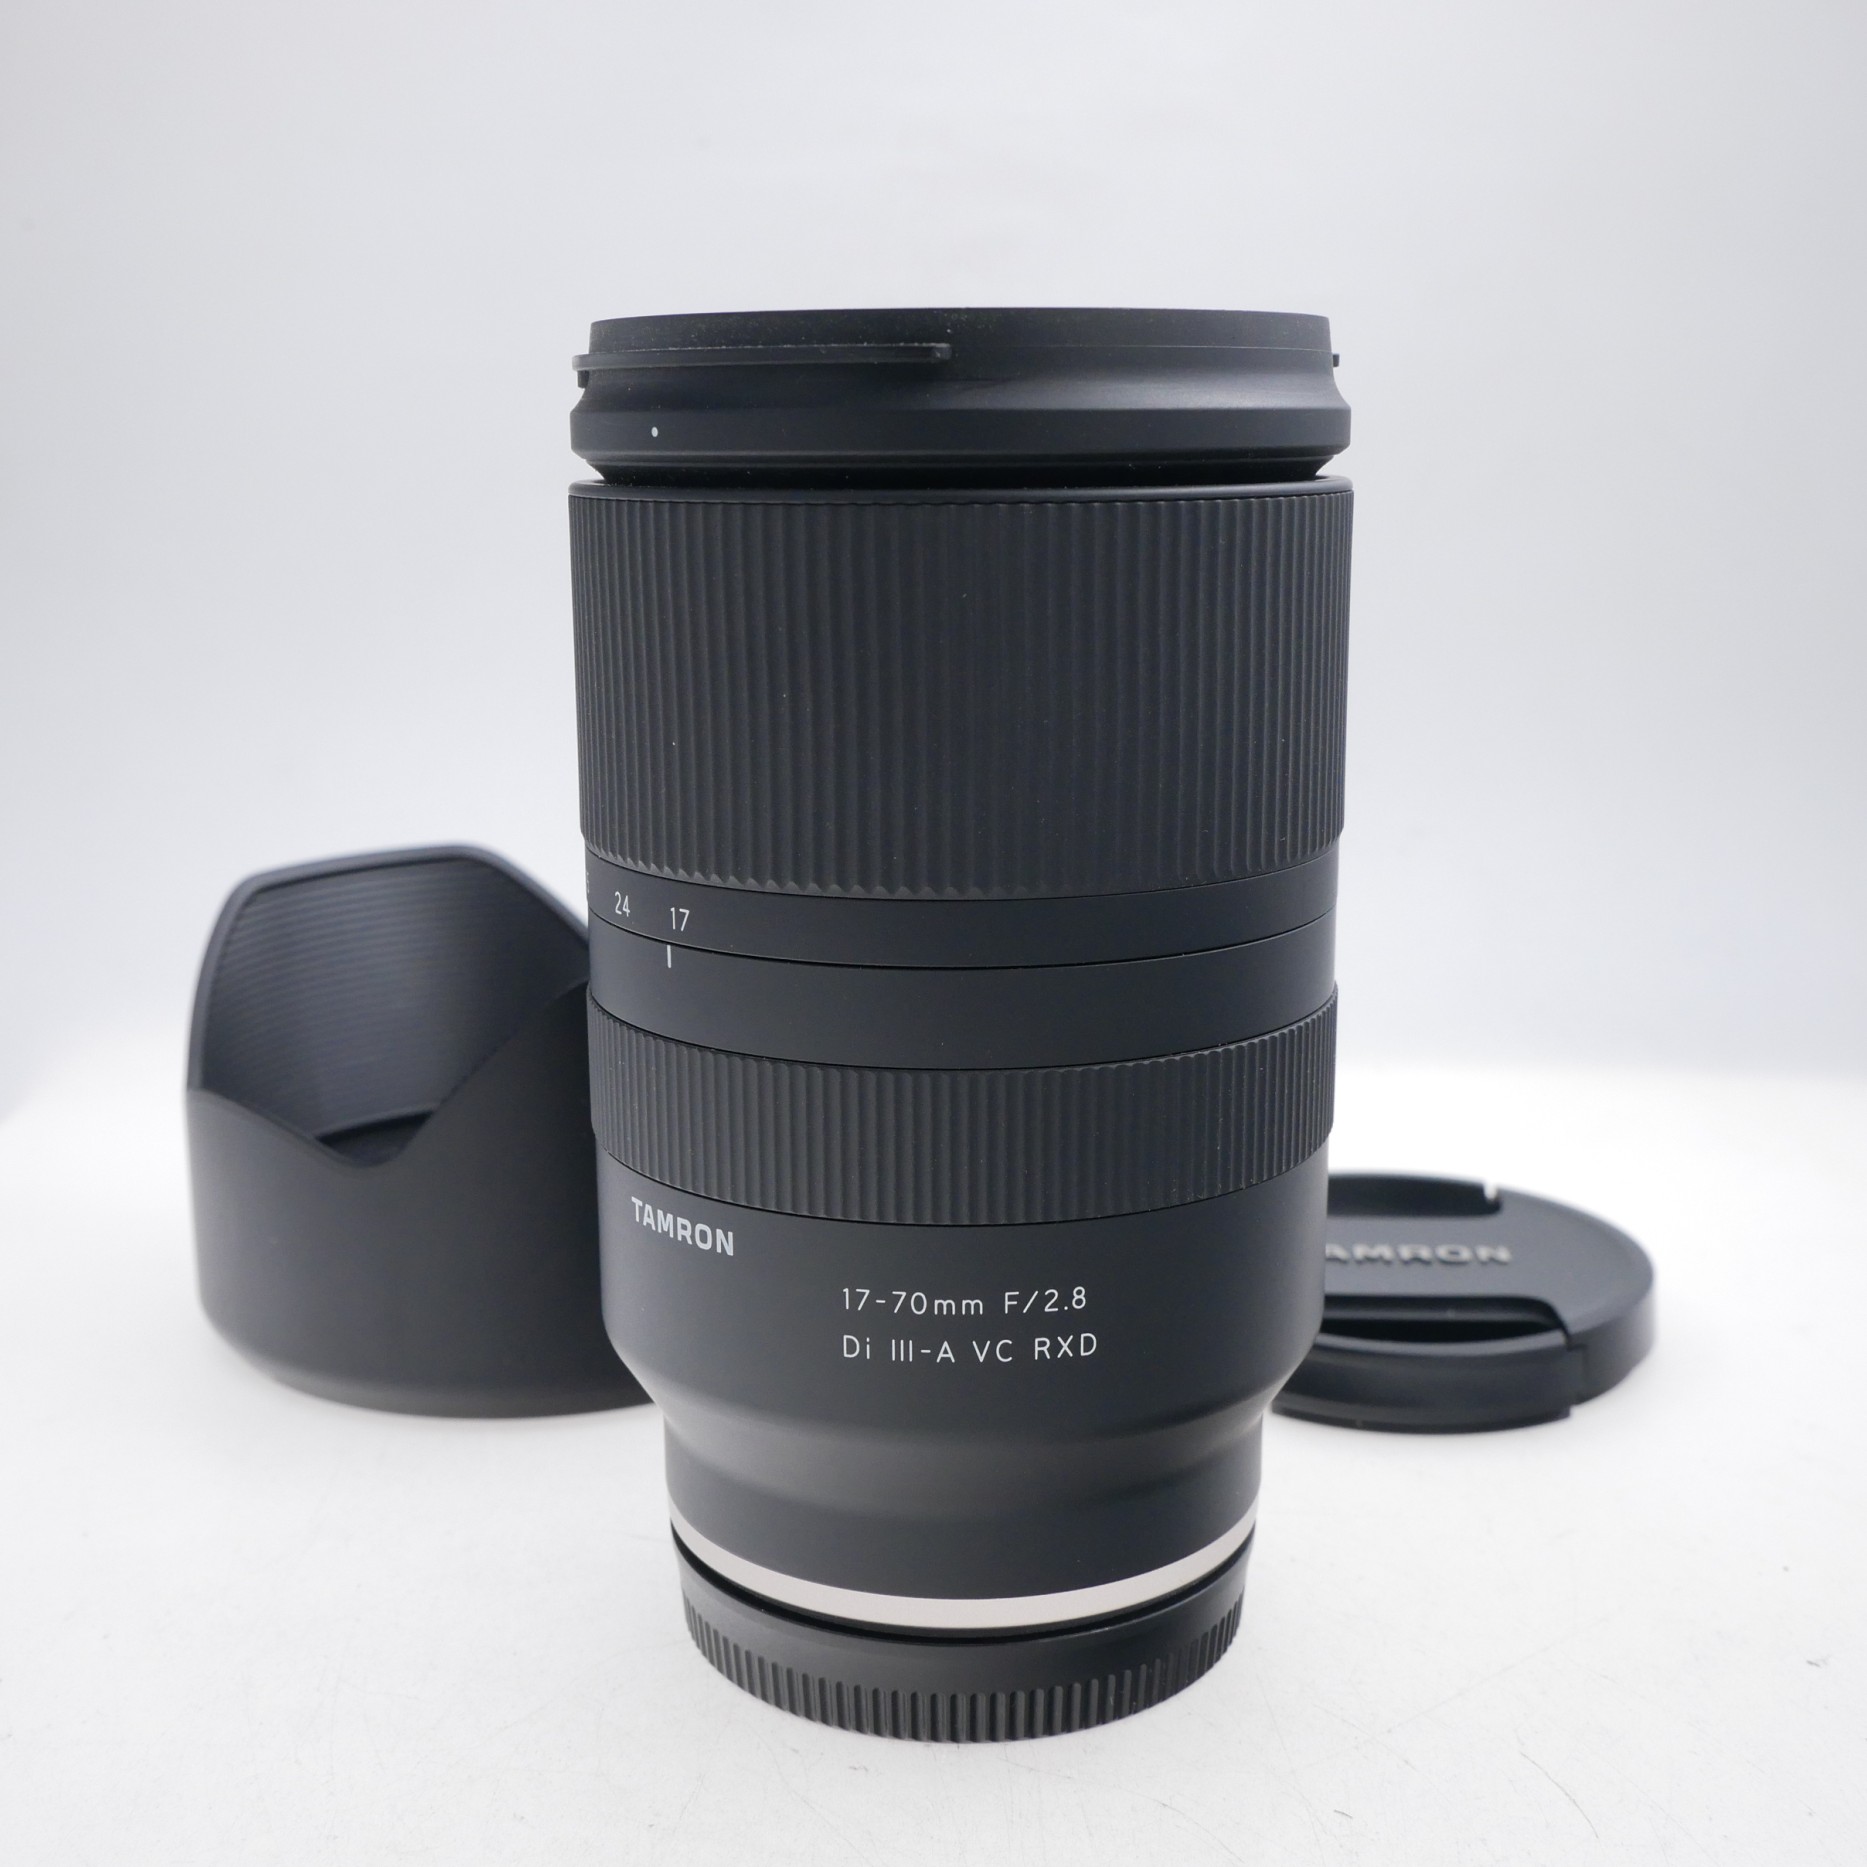 Tamron 17-70mm F2.8 Di III-A VC RXD for E-Mount 